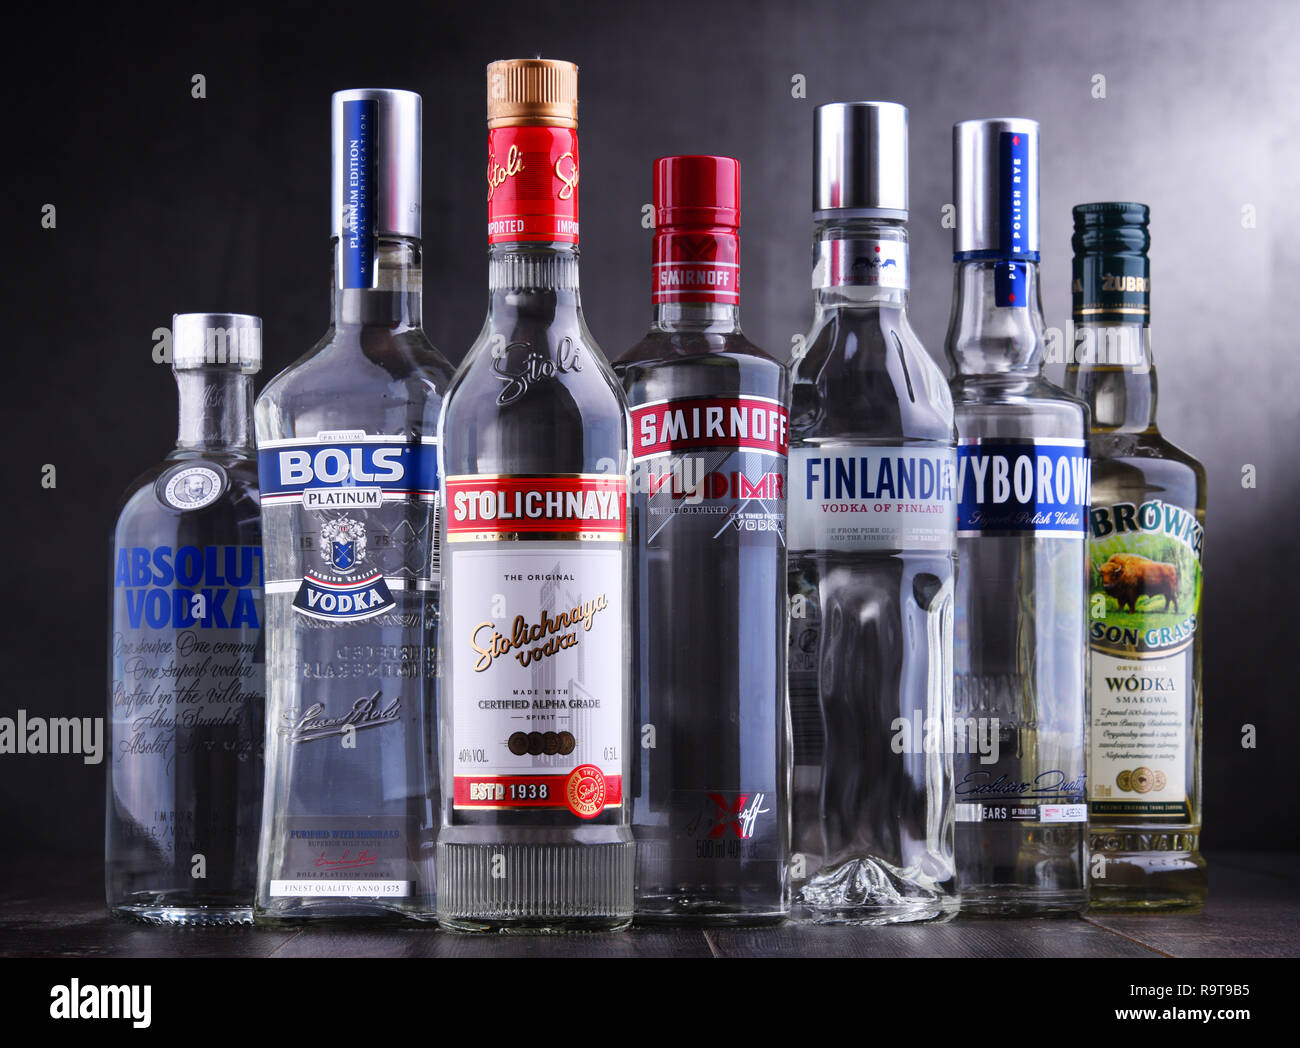 POZNAN, POLAND - NOV 15, 2018: Bottles of several global brands of vodka, the world’s largest internationally traded spirit with the estimated sale of Stock Photo